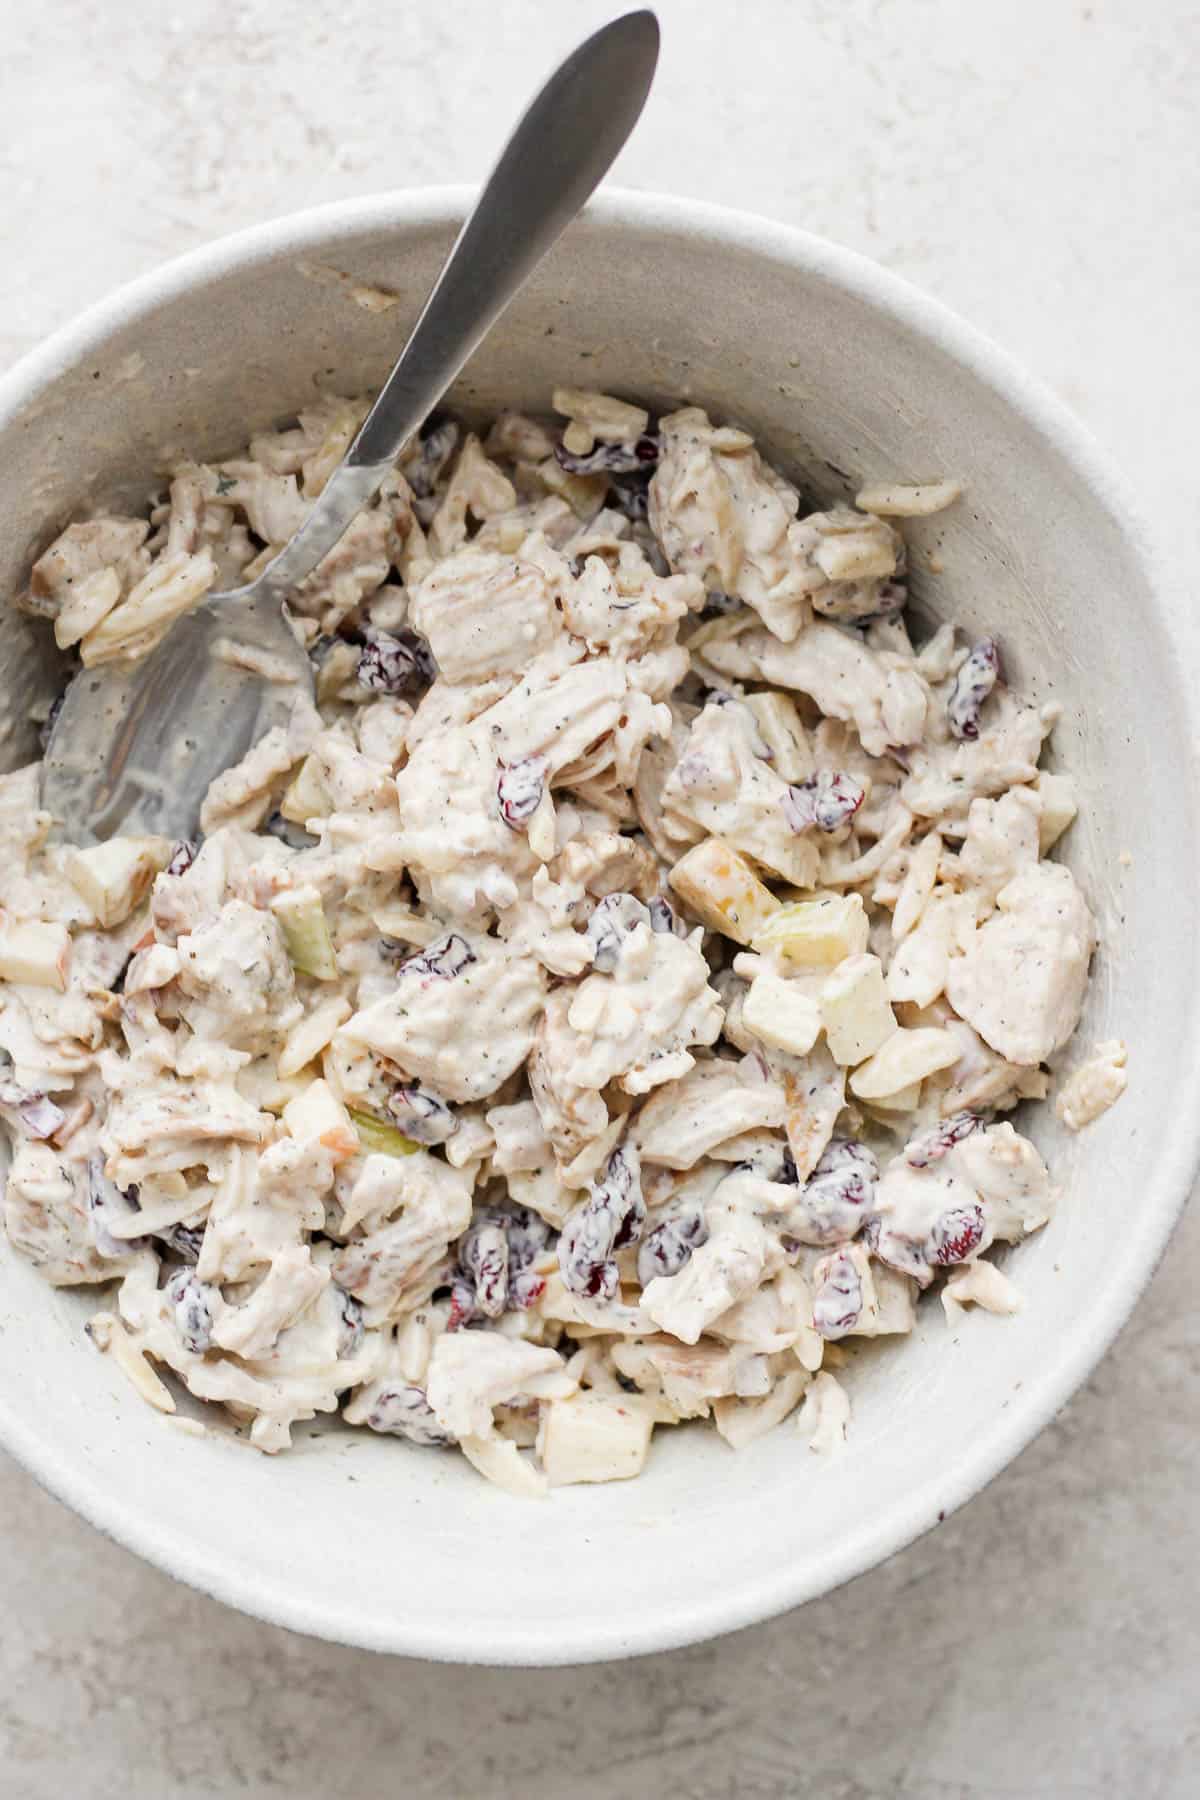 Turkey salad after mixing in a large bowl with a spoon.